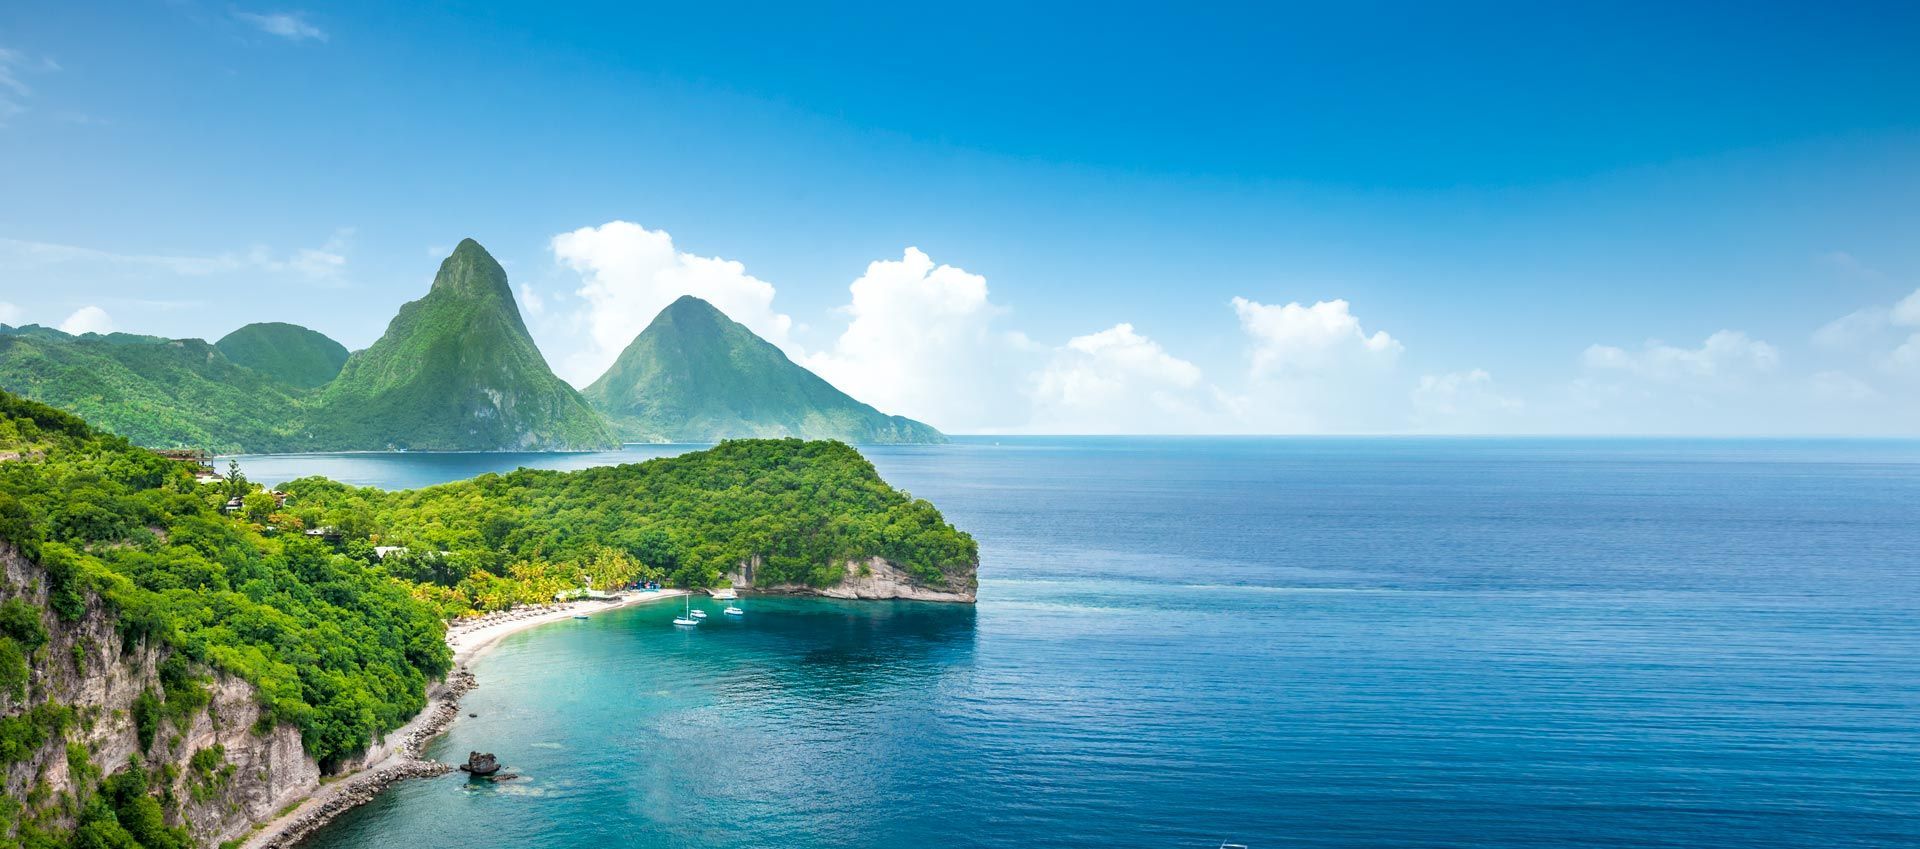 19 Beautiful Things Saint Lucia Is Known For